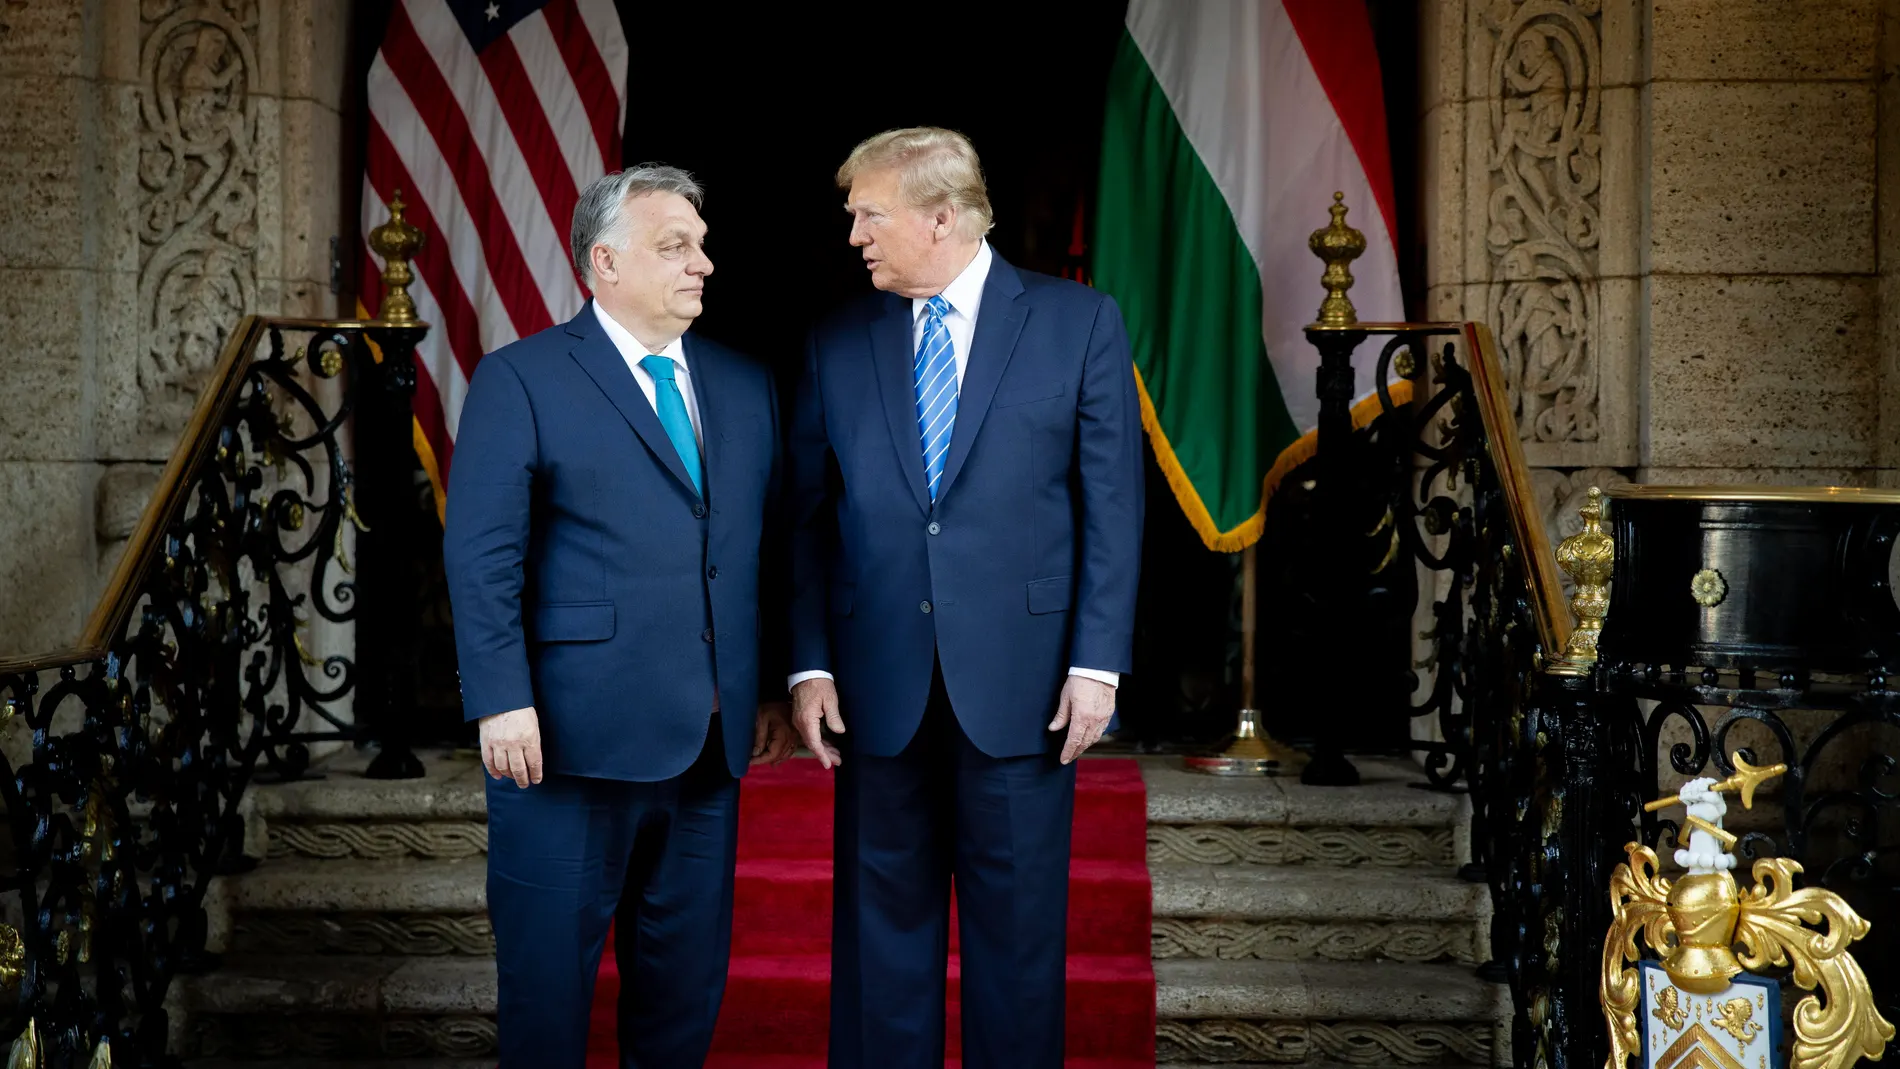 Palm Beach (United States), 08/03/2024.- A handout photo made available by the Hungarian Prime Minister's Office shows former US President and Republican presidential candidate Donald Trump (R) and Hungarian Prime Minister Viktor Orban posing for photographers before their meeting at Trump's Mar-a-Lago estate in Palm Beach, Florida, USA, 08 March 2024. (Hungría) EFE/EPA/Zoltan Fischer / HANDOUT HANDOUT EDITORIAL USE ONLY NO SALES HANDOUT EDITORIAL USE ONLY/NO SALES HANDOUT EDITORIAL USE ONLY...